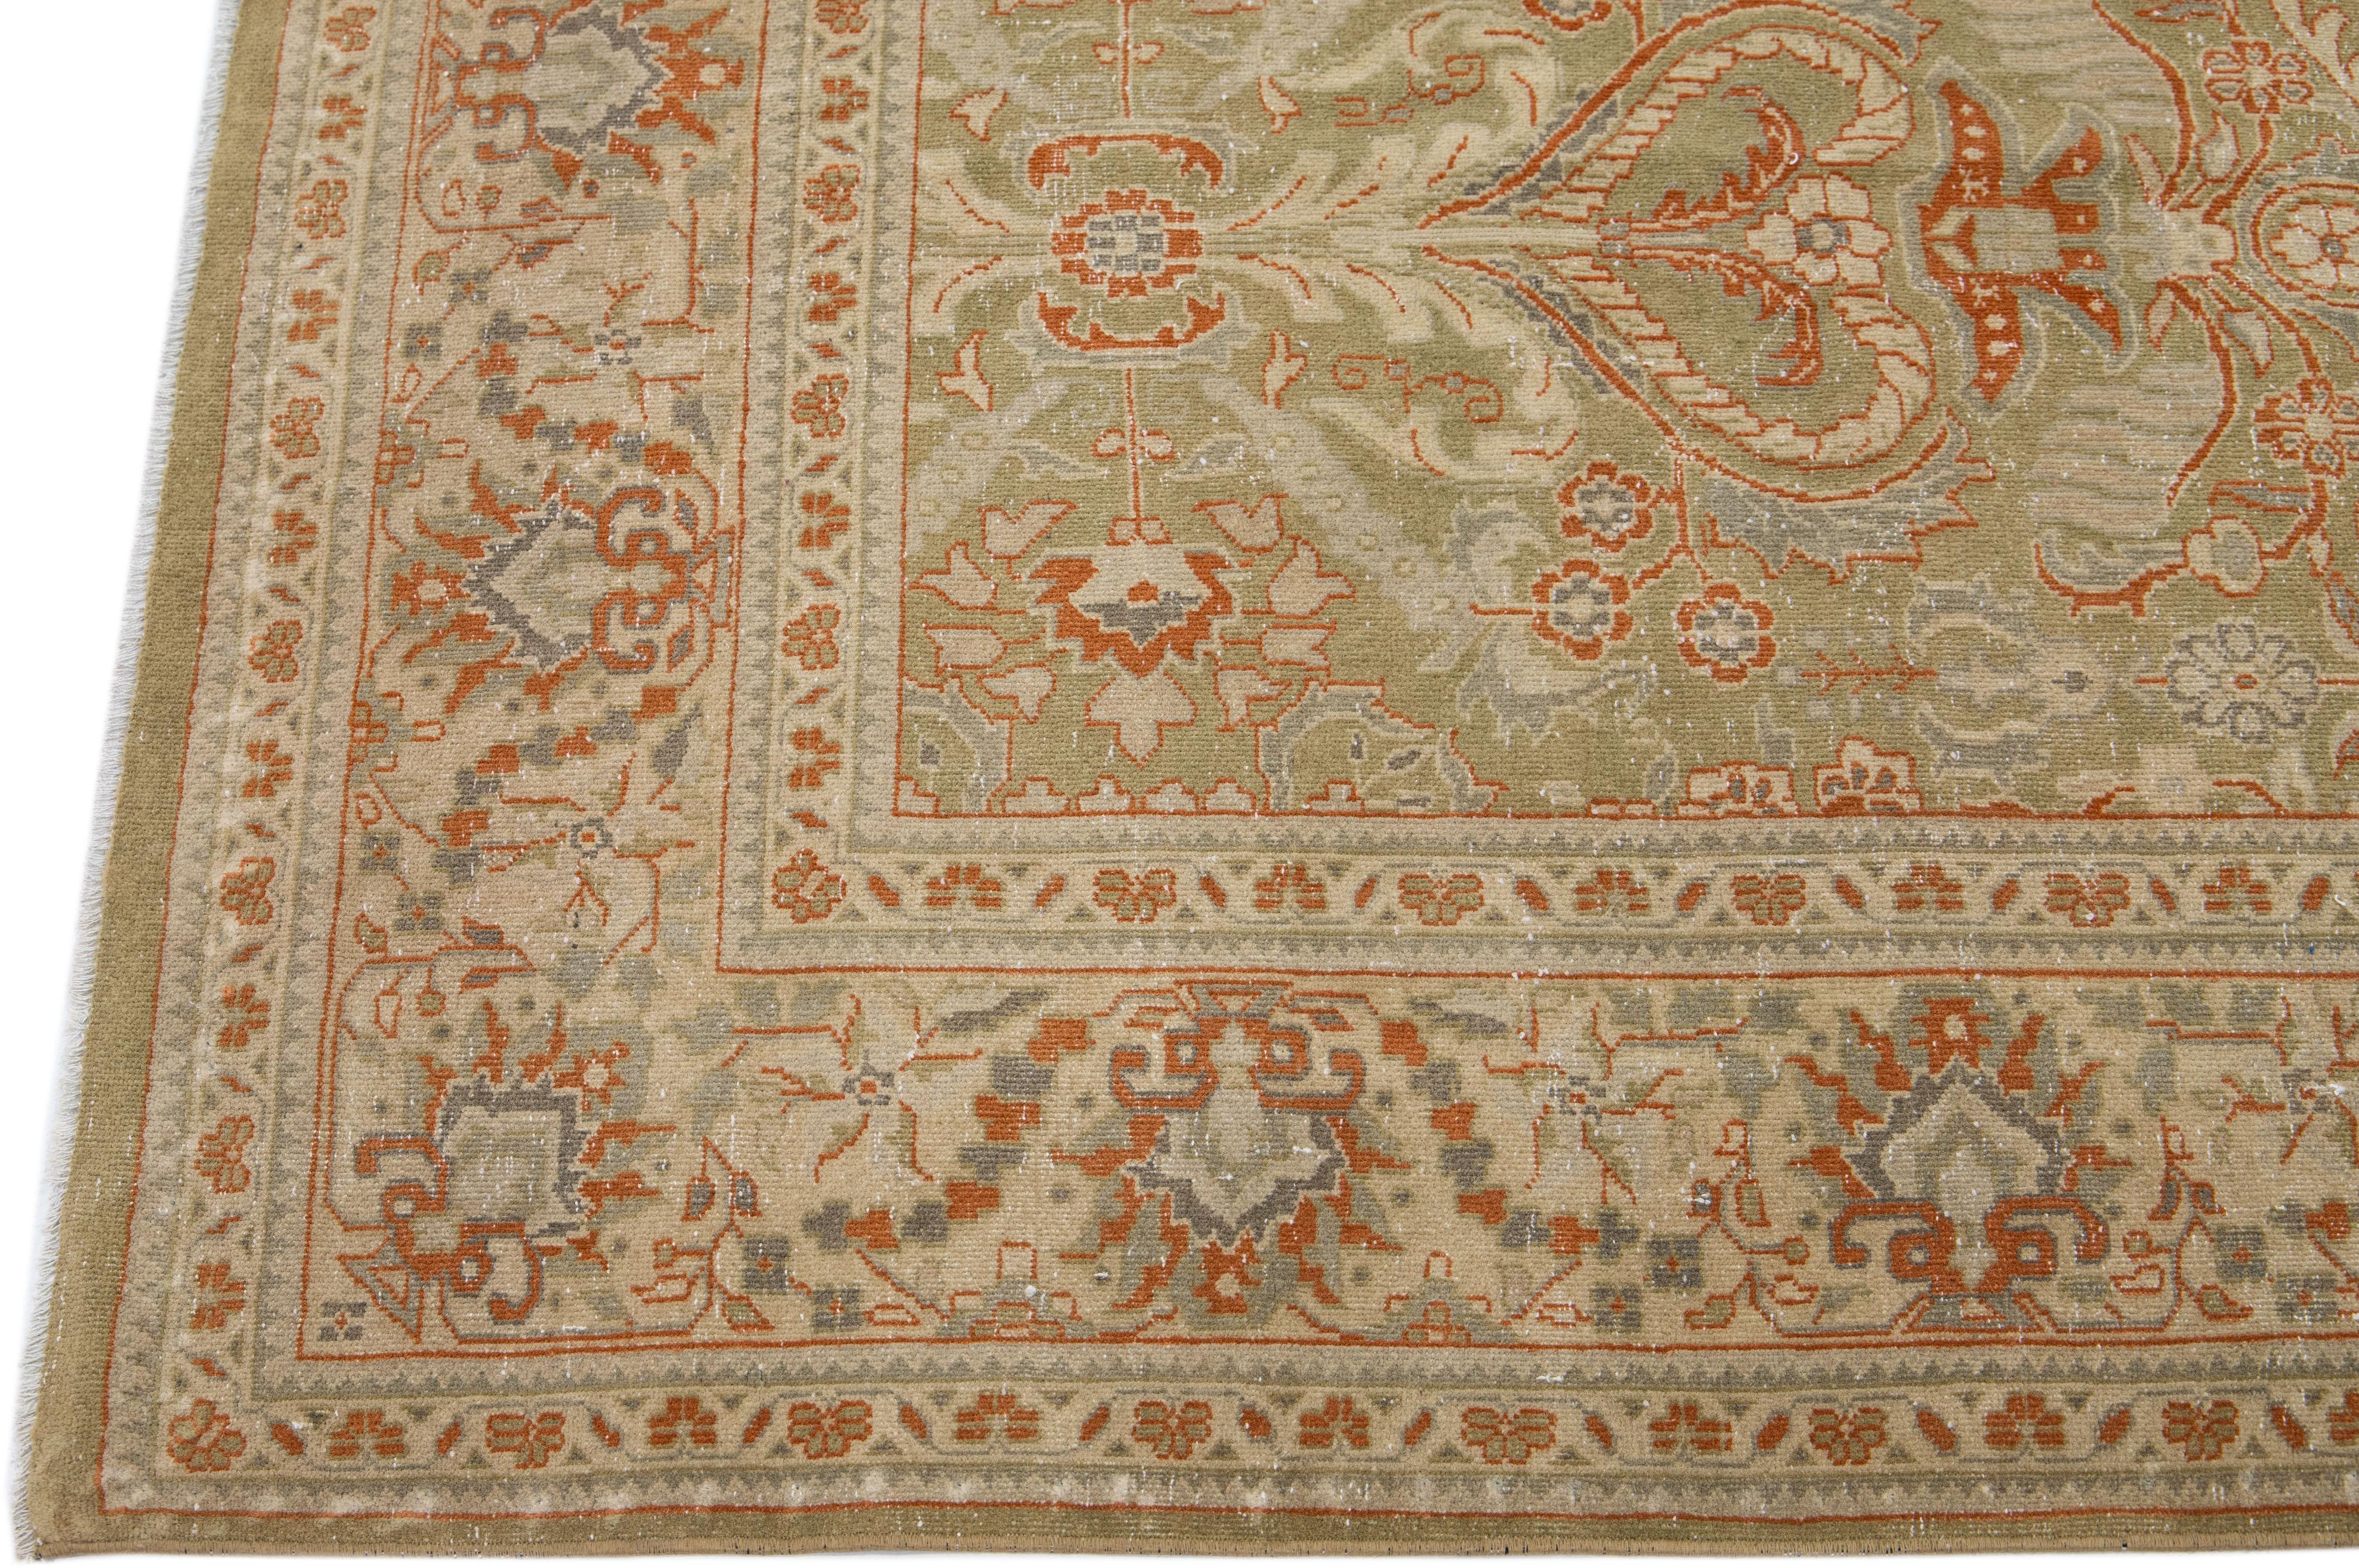 Green Antique Persian Mahal Handmade Square Wool Rug with Allover Floral Design In Good Condition For Sale In Norwalk, CT